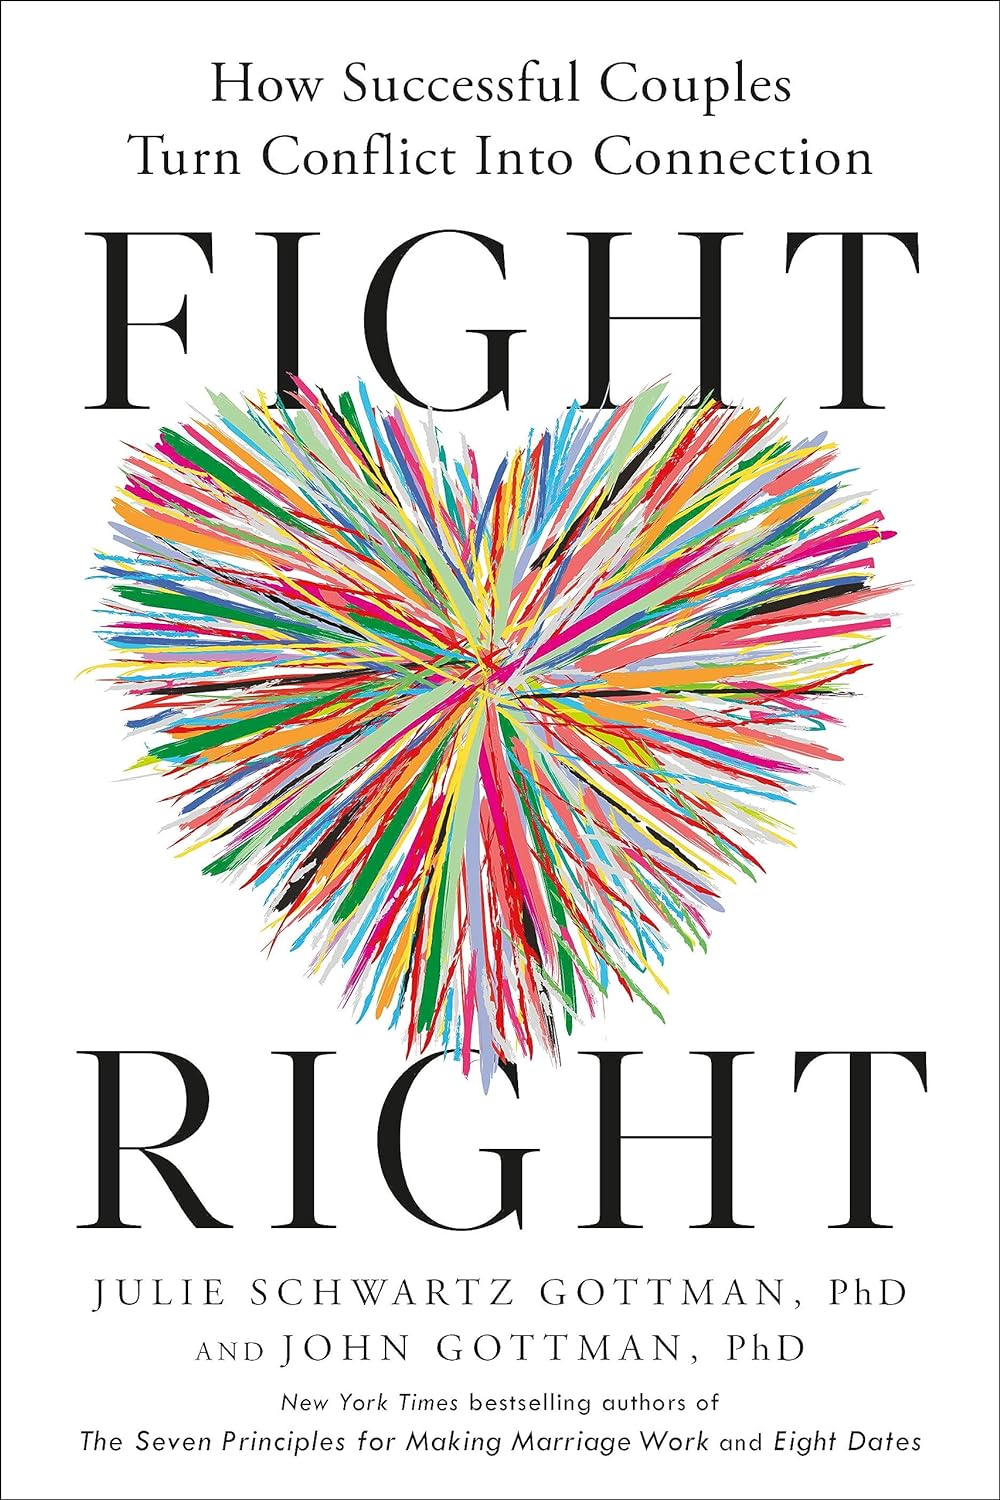 Fight Right: How Successful Couples Turn Conflict Into Connection